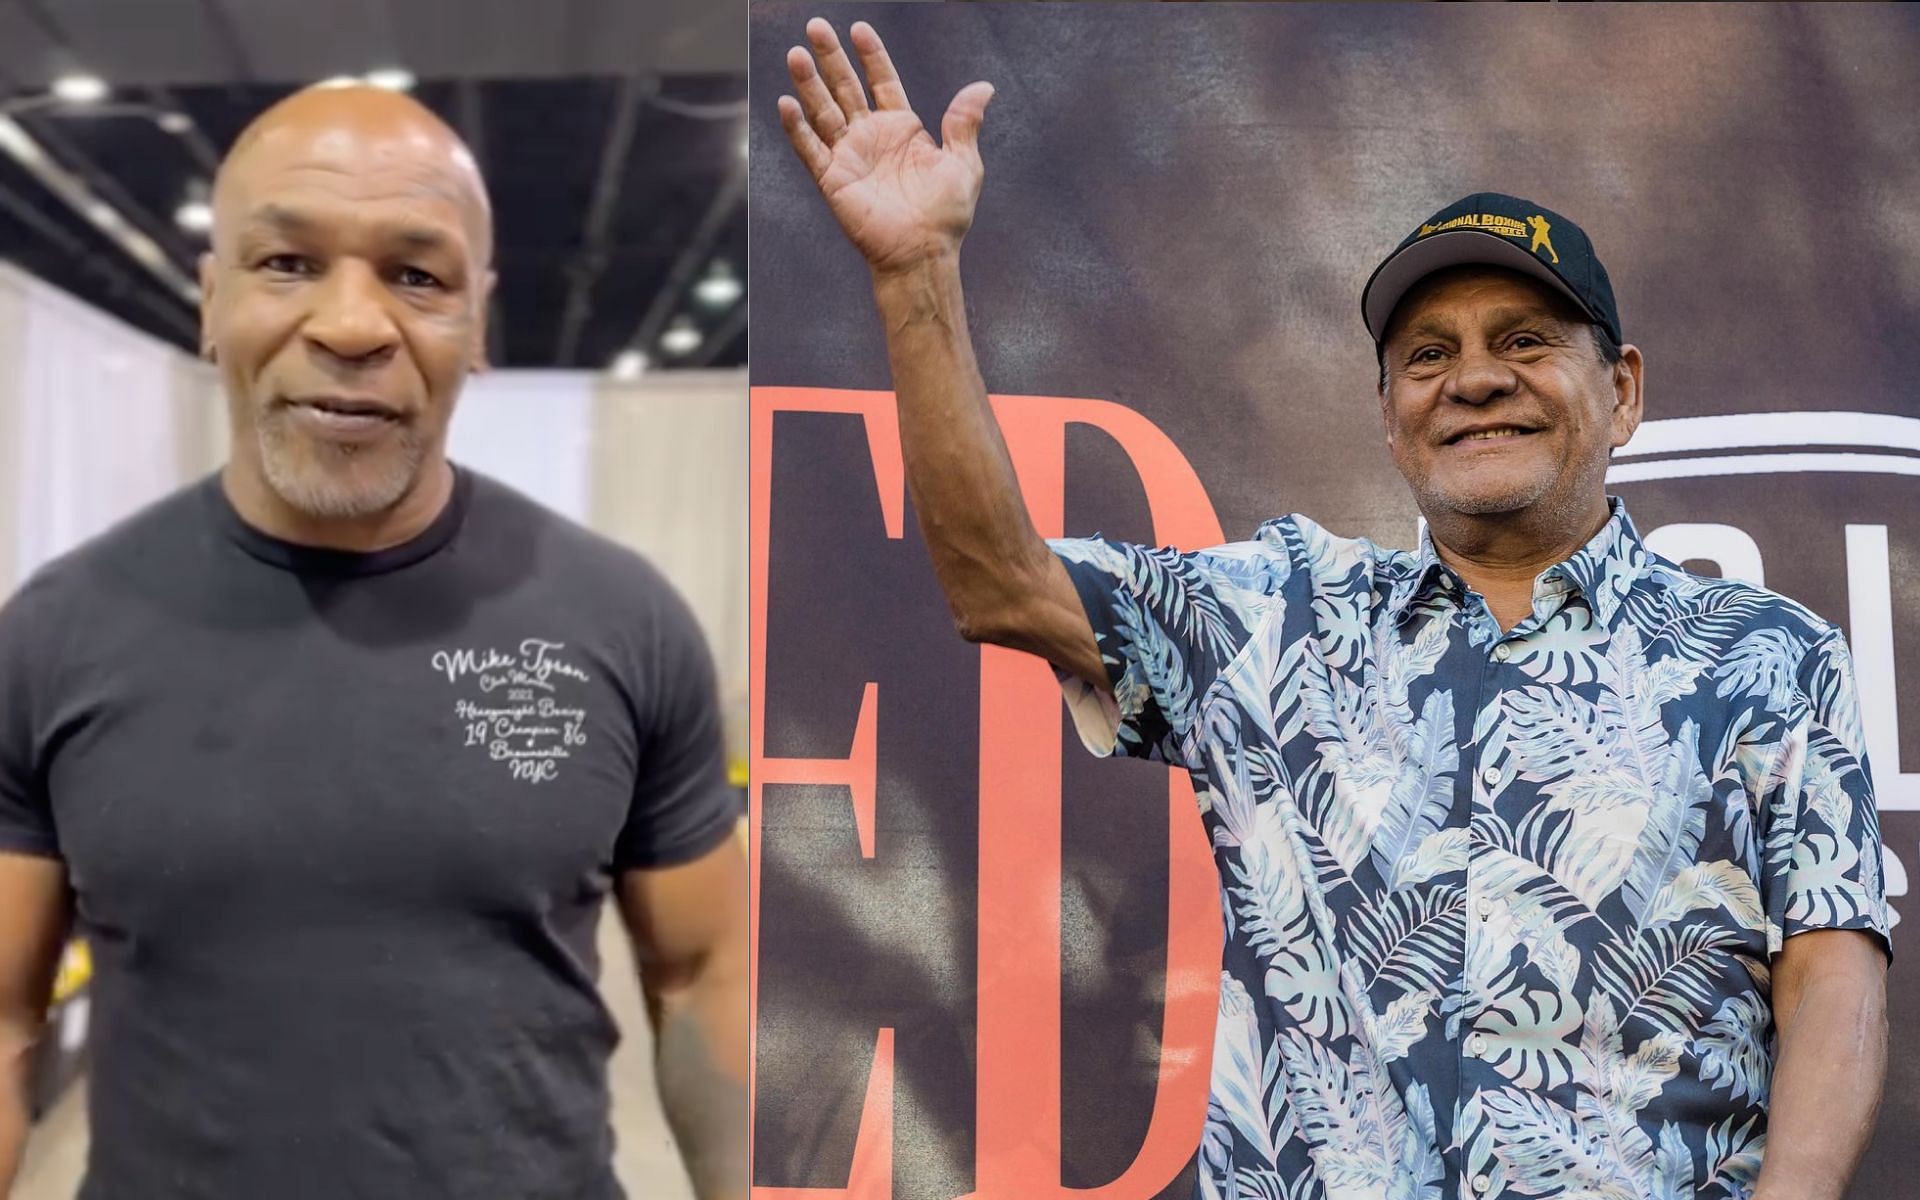 Mike Tyson (left) sends a message to Roberto Duran (right) after hearing news of the latter